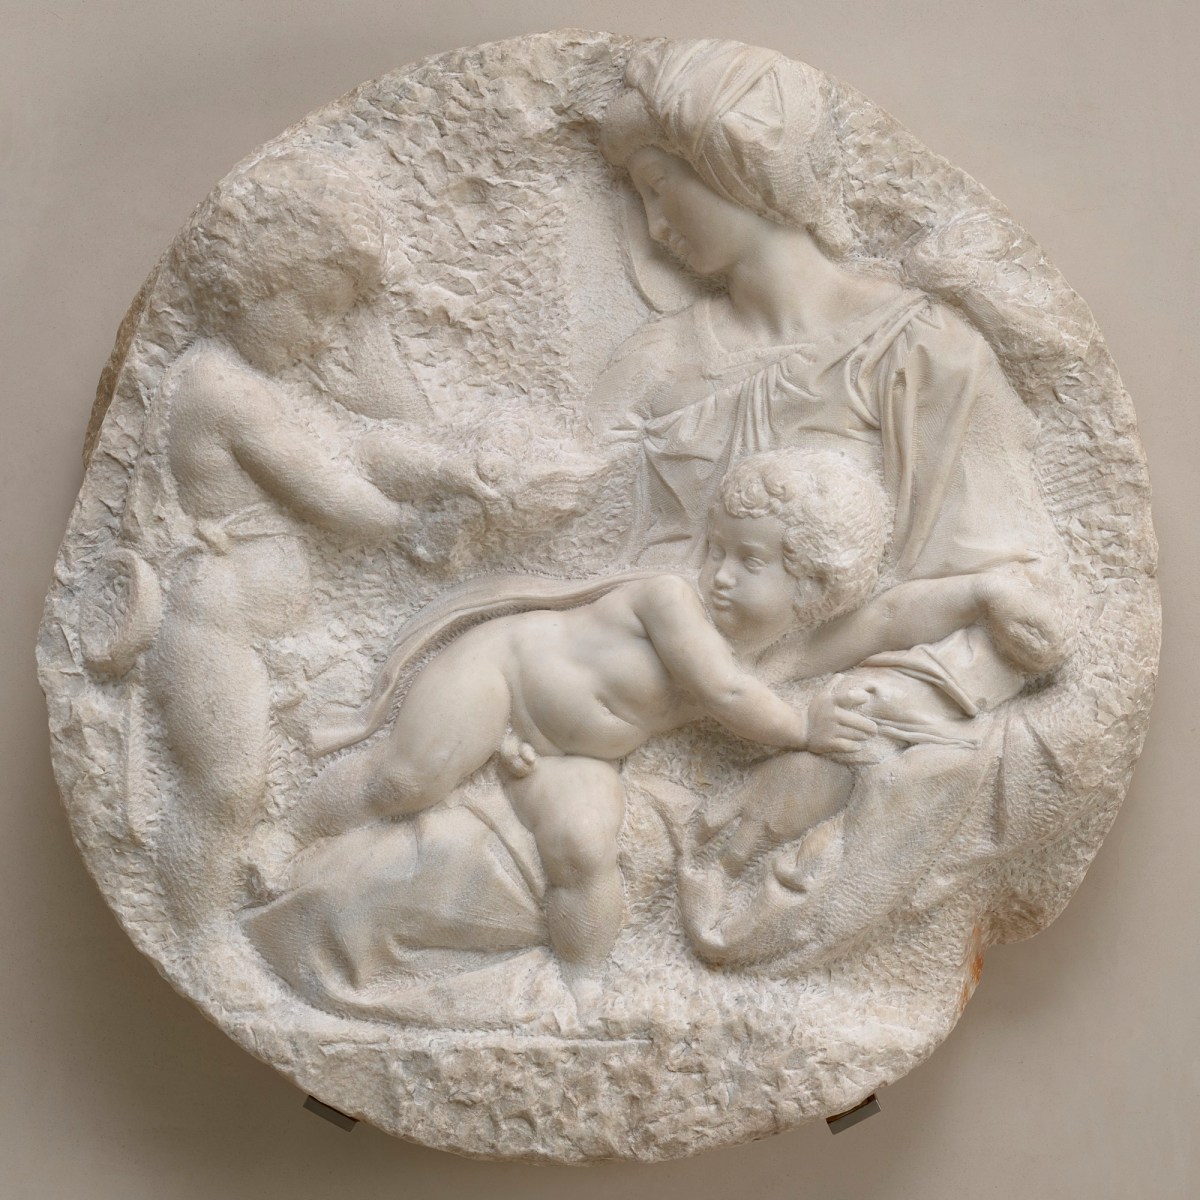 Michelangelo Buonarroti, Taddei Tondo : The Virgin and Child with the Infant St John, Royal Academy of Arts